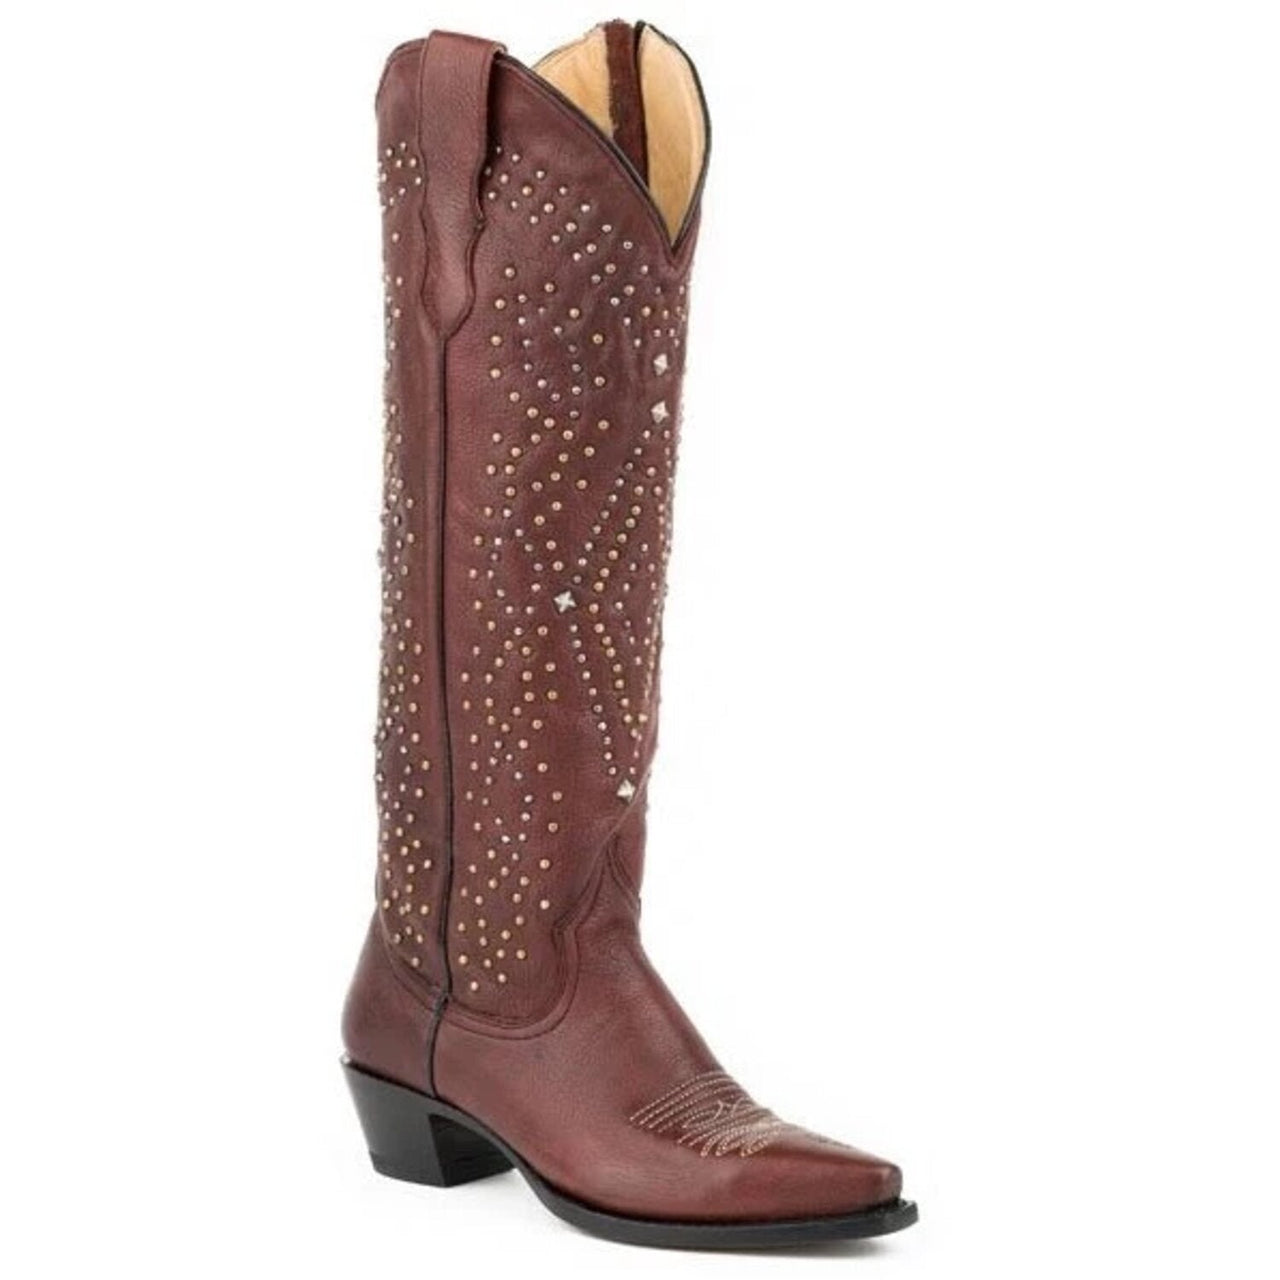 Women's Stetson Crystal Knee High Boots Snip Toe Handcrafted Brown - yeehawcowboy